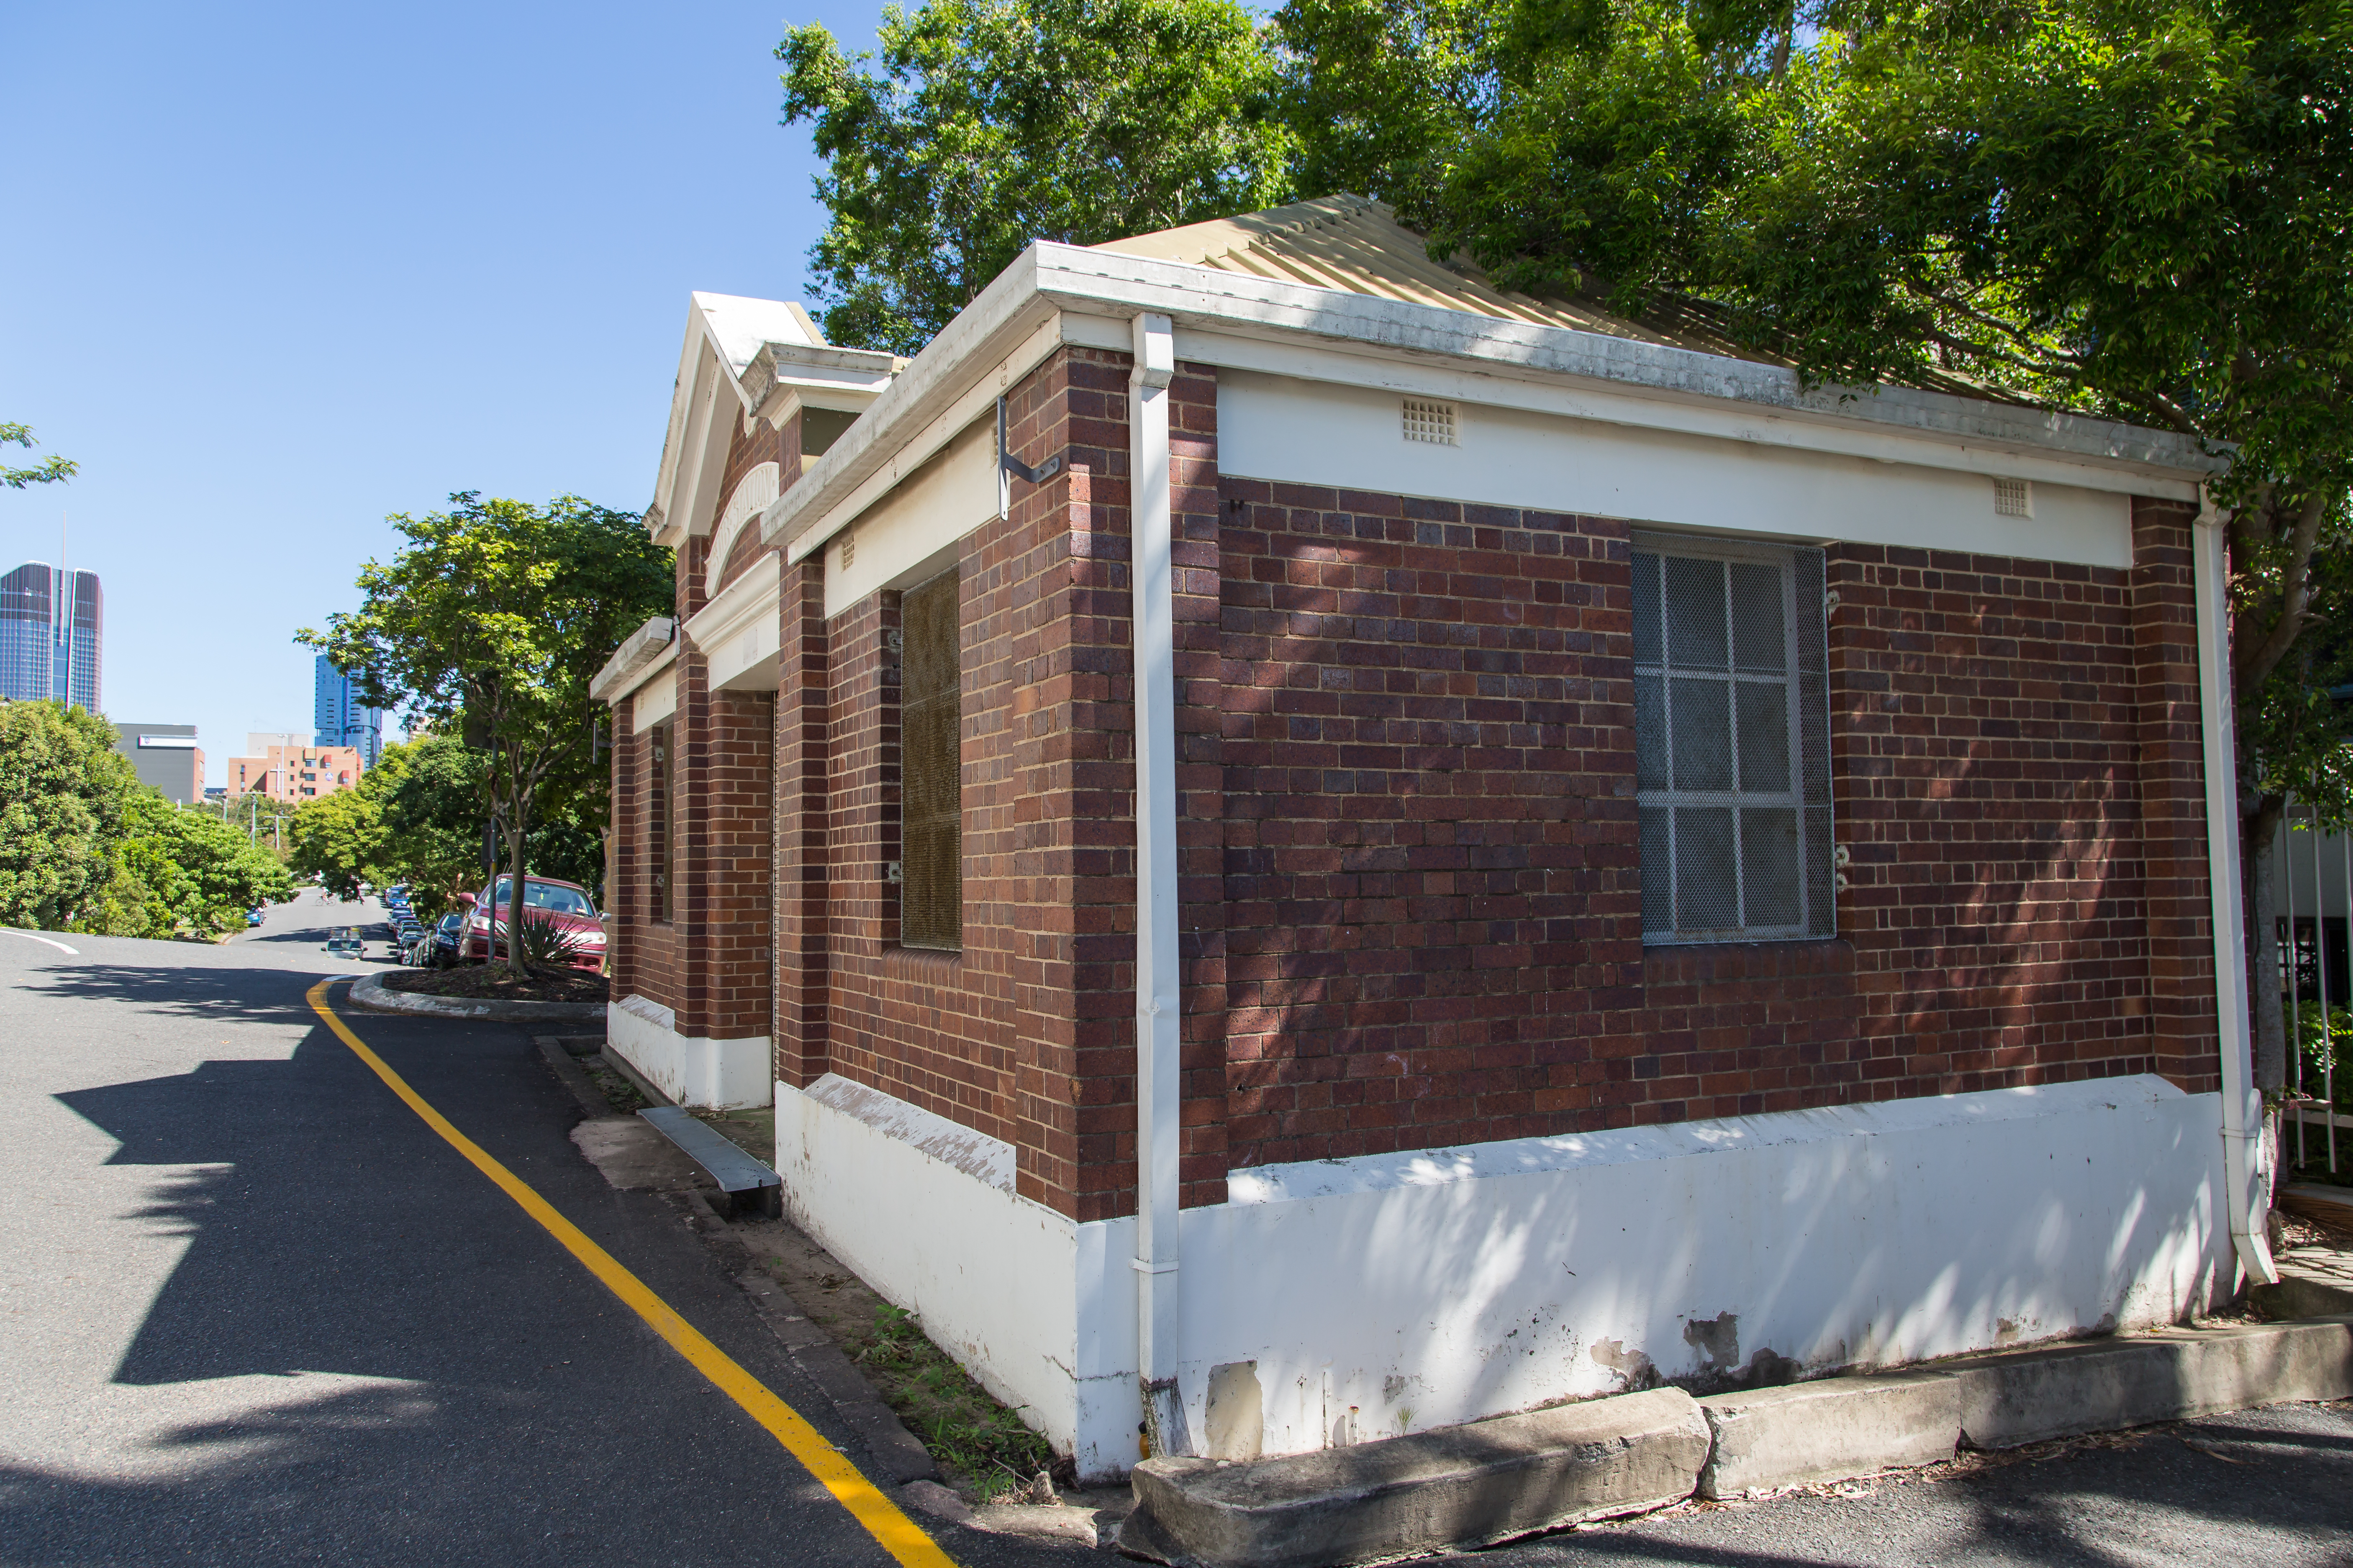 This is an image of the side of the heritage place known as Cairns Street Substation 211